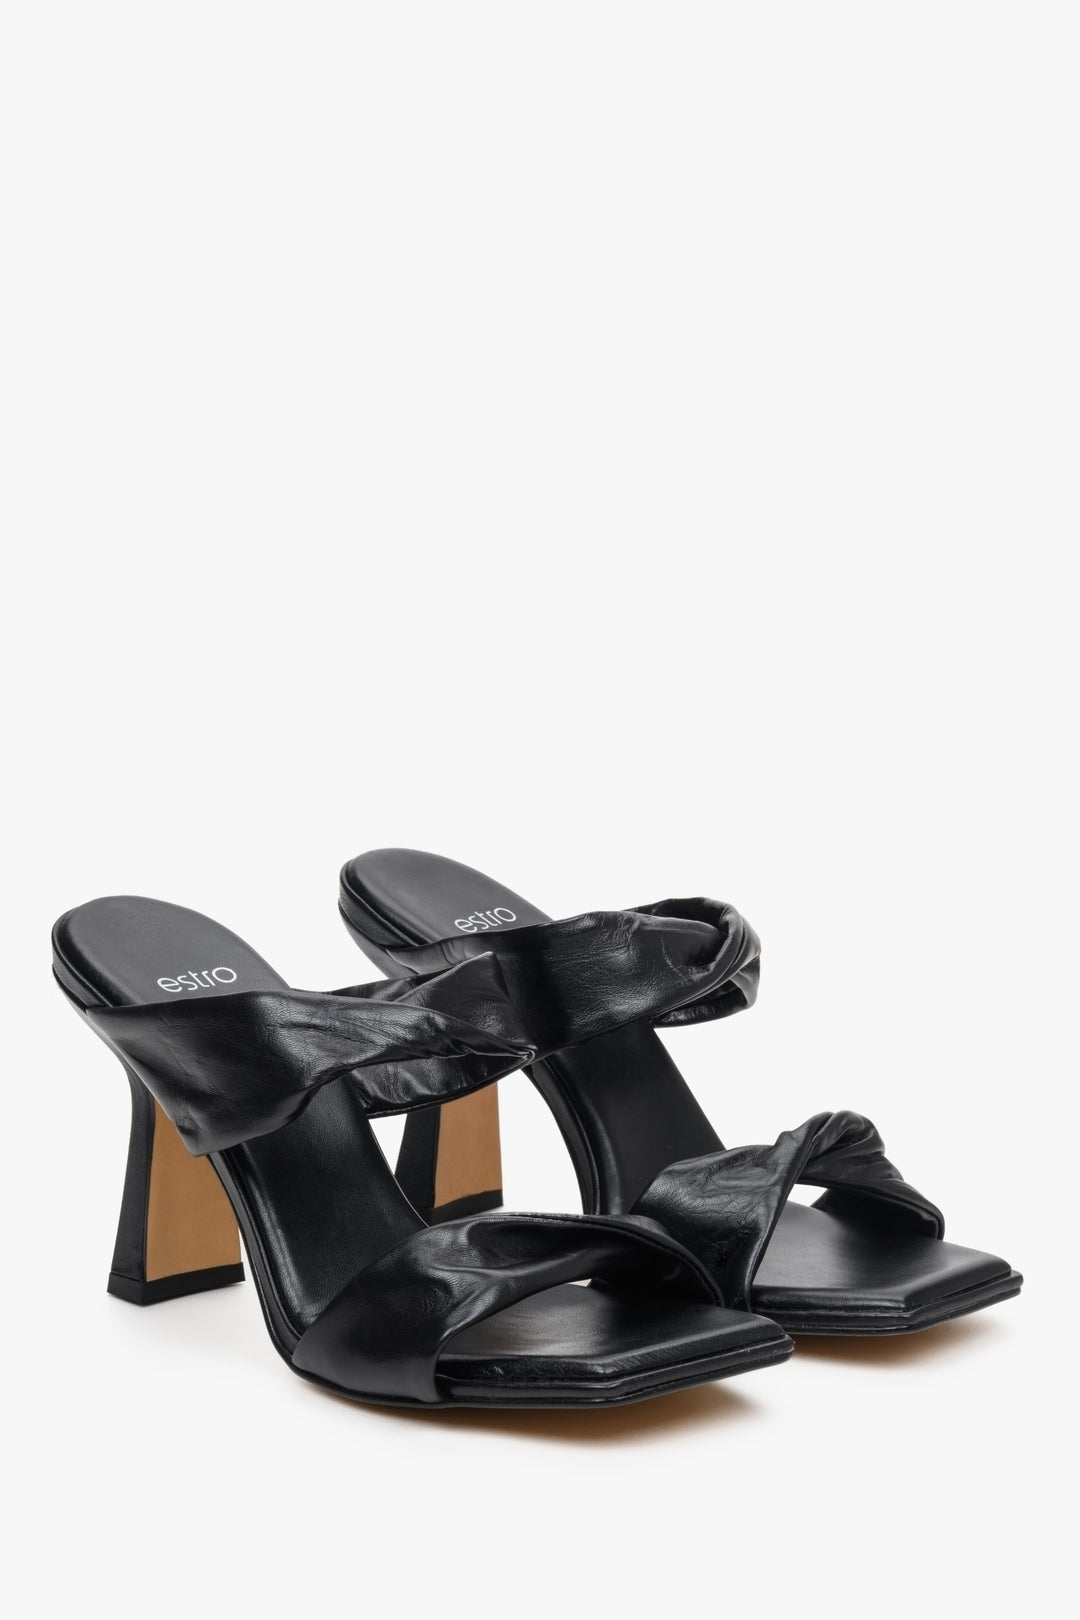 Women's black leather sandals by Estro with woven straps - perfect for summer.